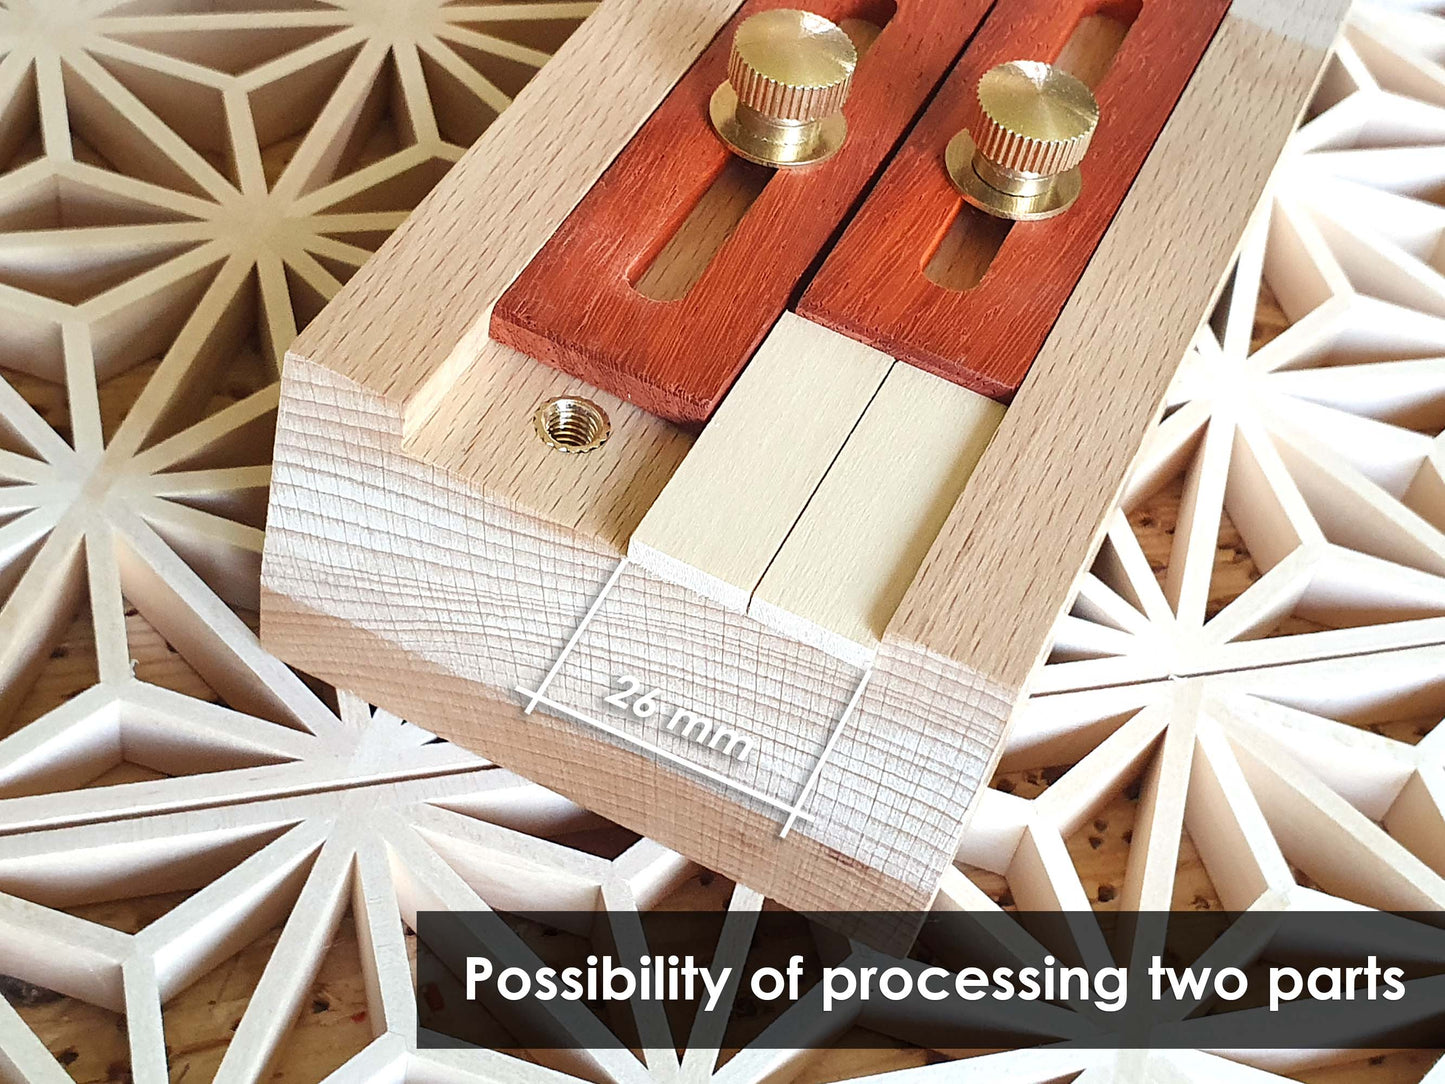 Kumiko jig (guide block) for 7.5-82.5 degrees with high precision